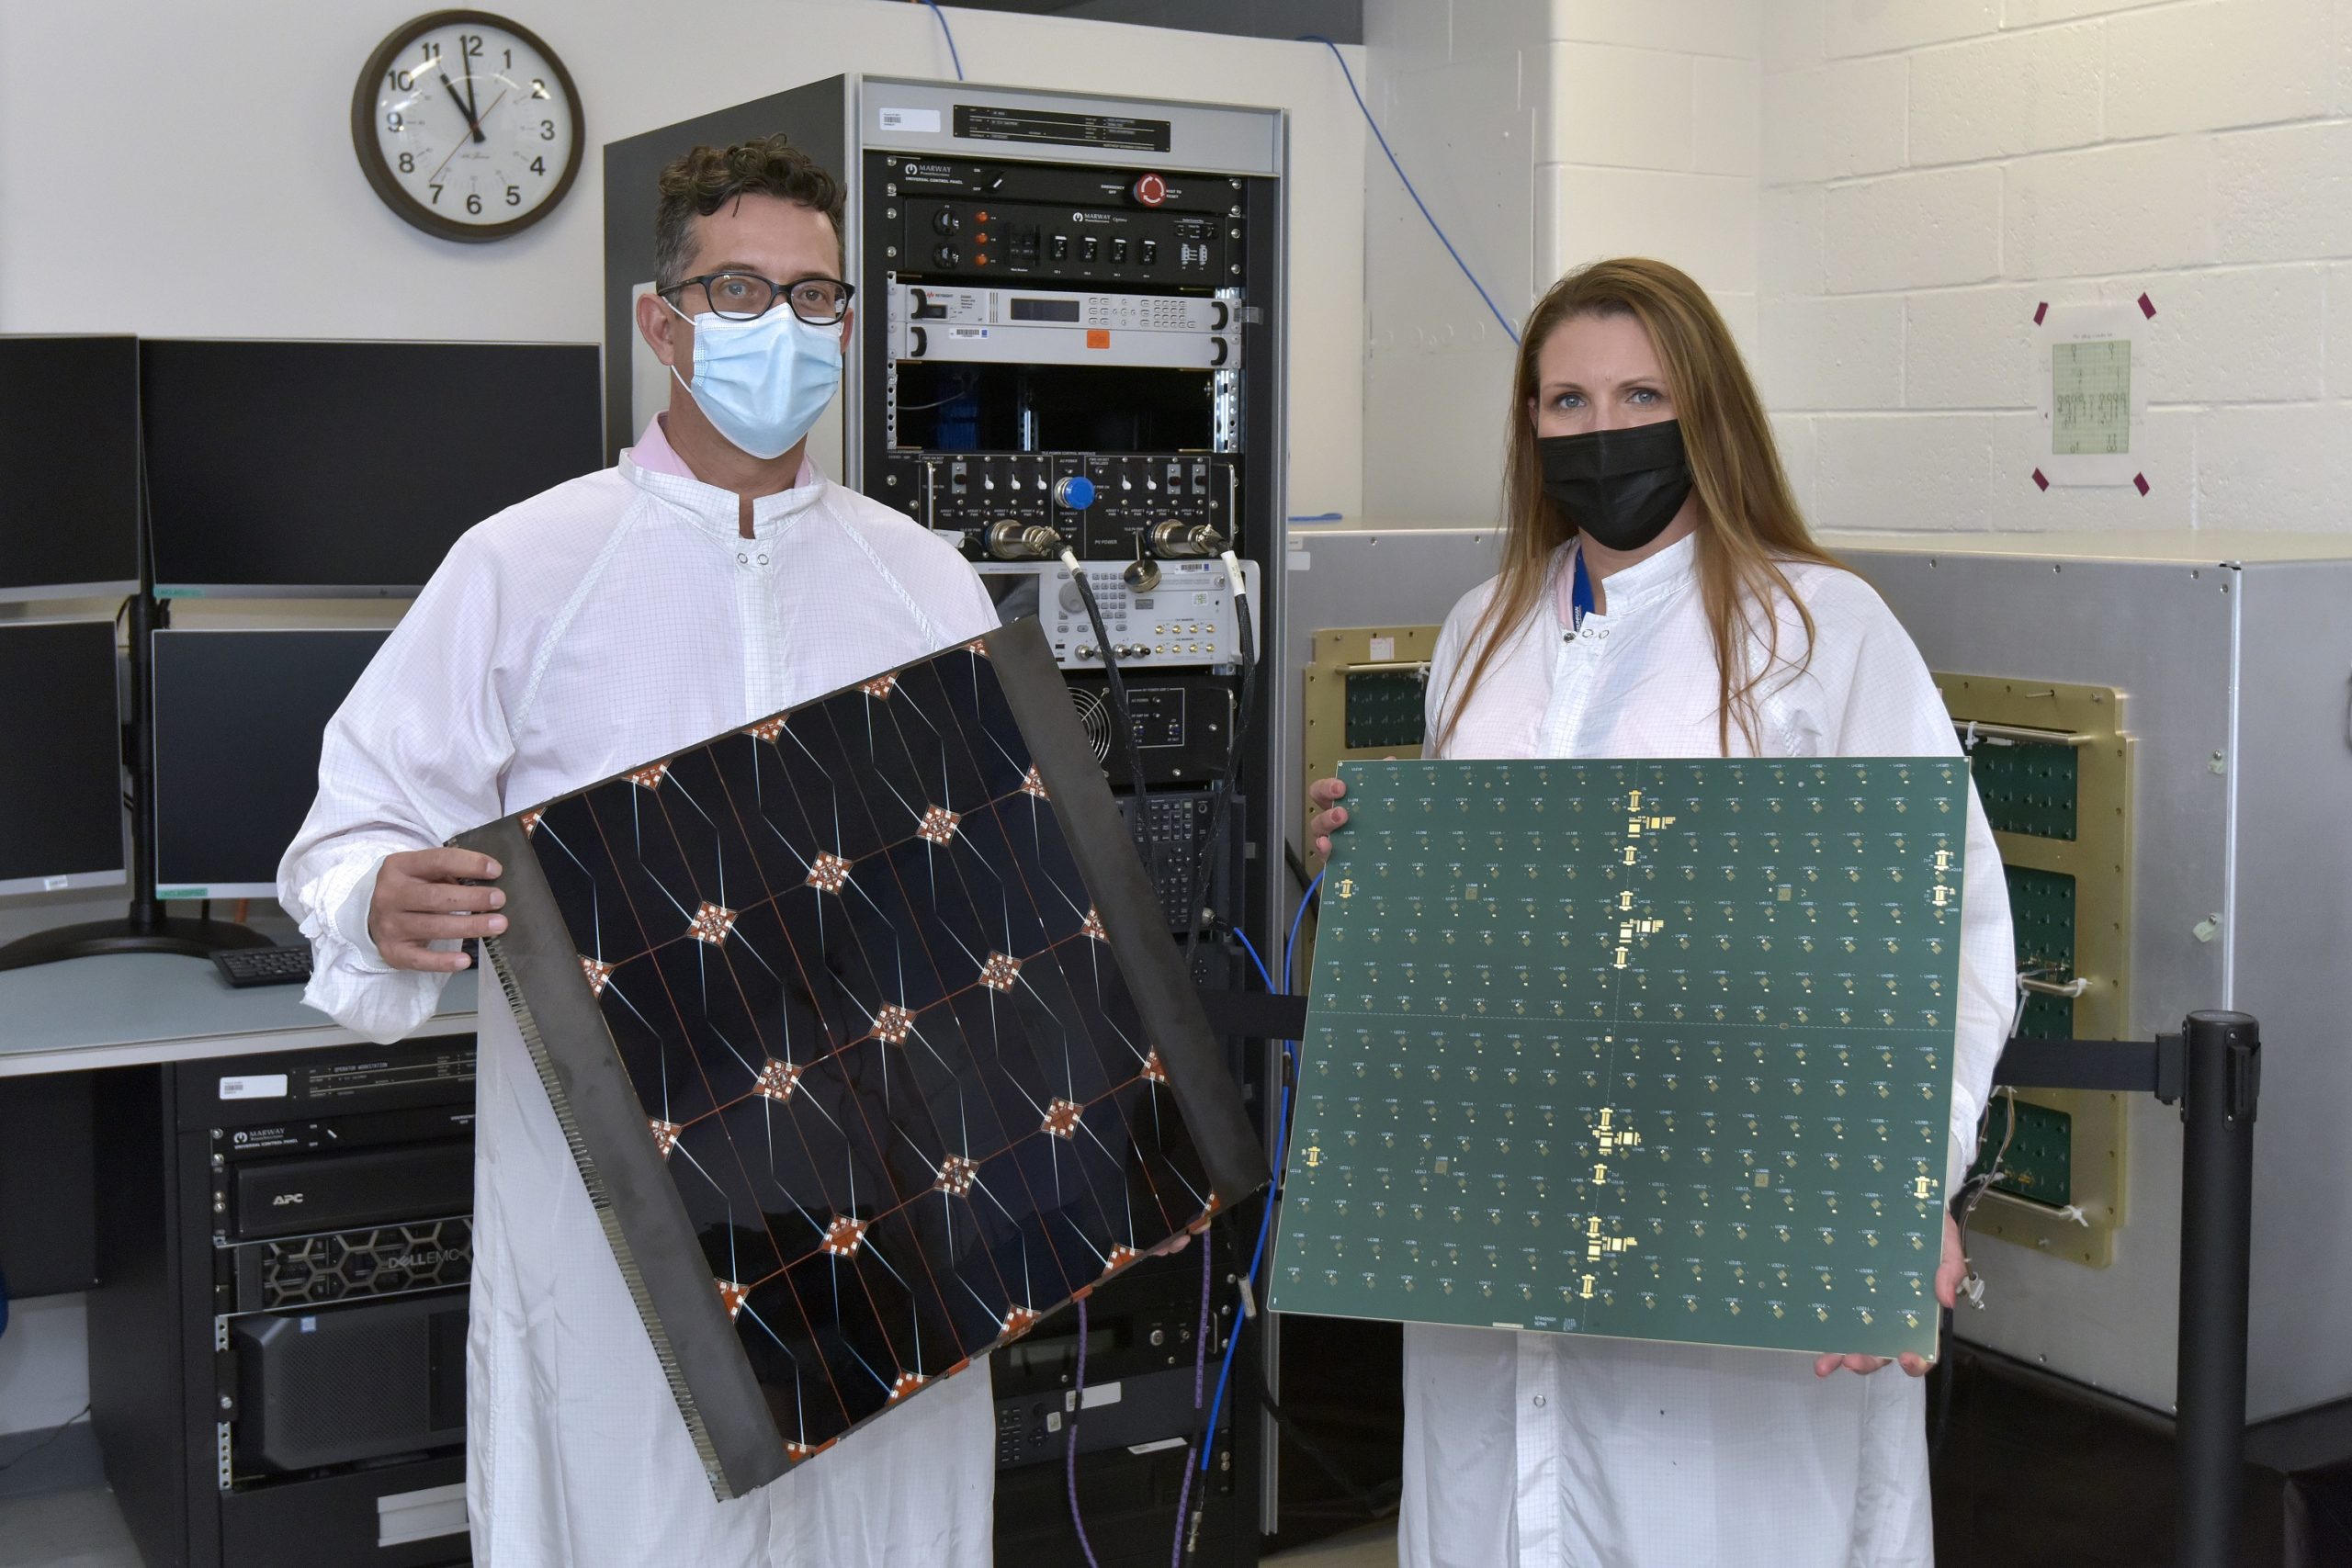 Male and female scientists holding solar panels